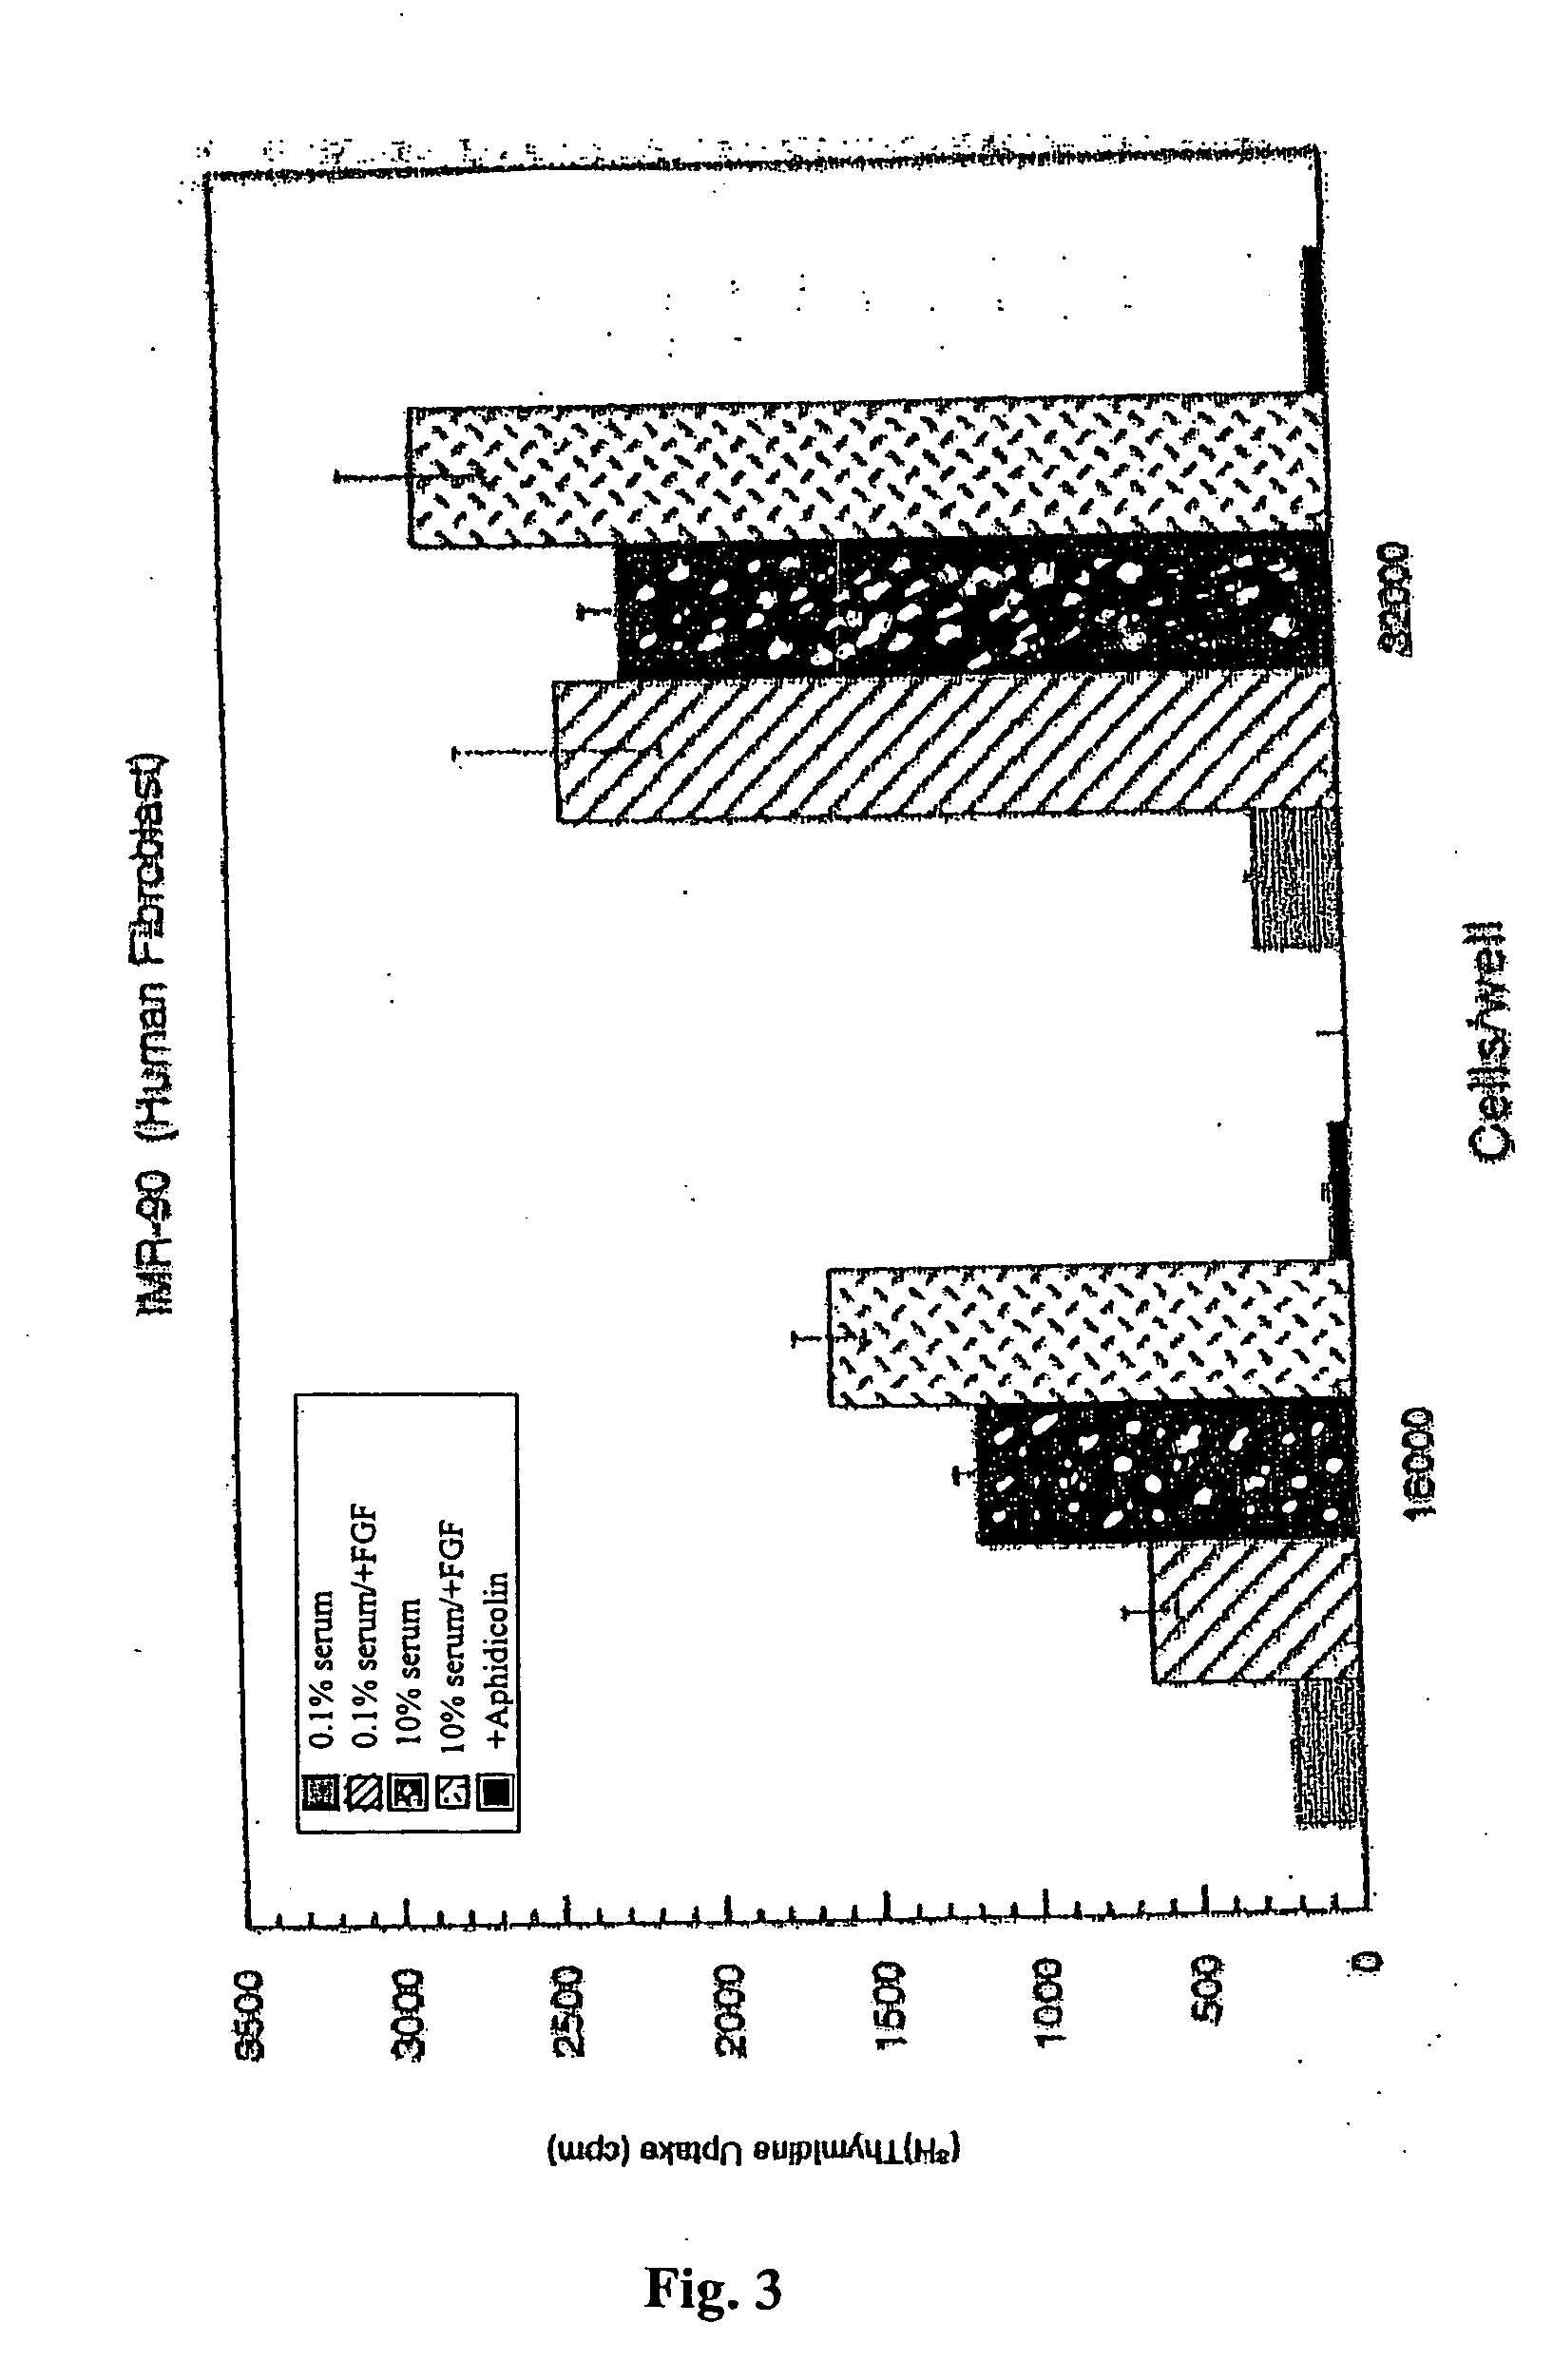 Methods of identifying cytotoxic effects in quiescent cells